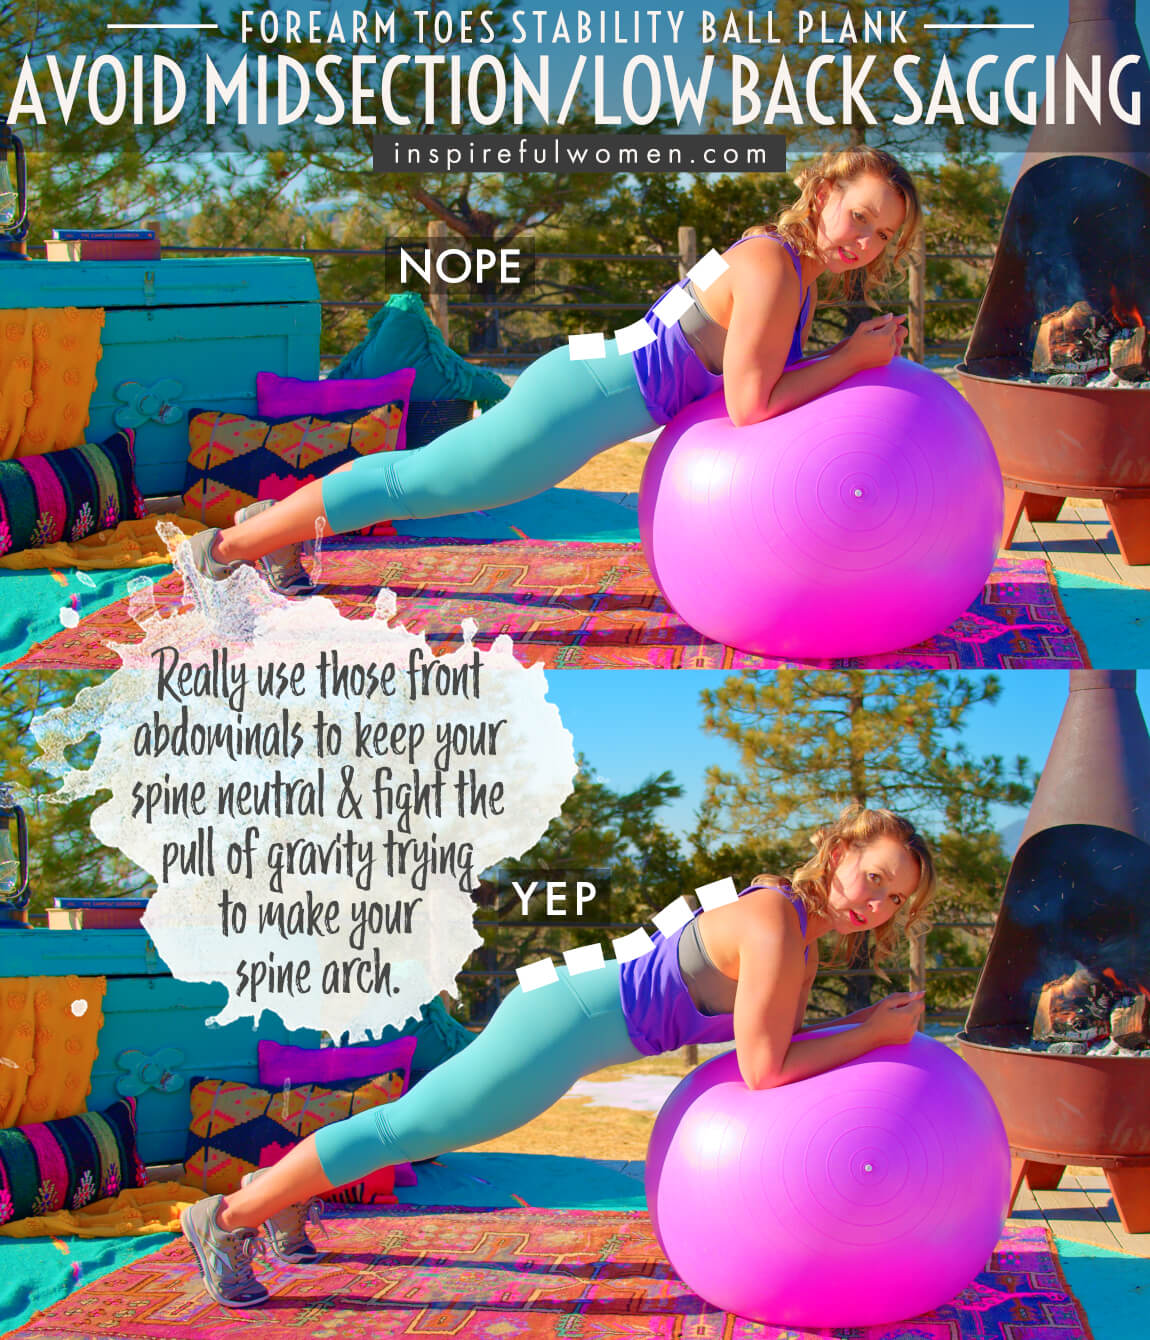 avoid-midsection-low-back-sagging-toes-forearm-ball-plank-core-exercise-proper-form